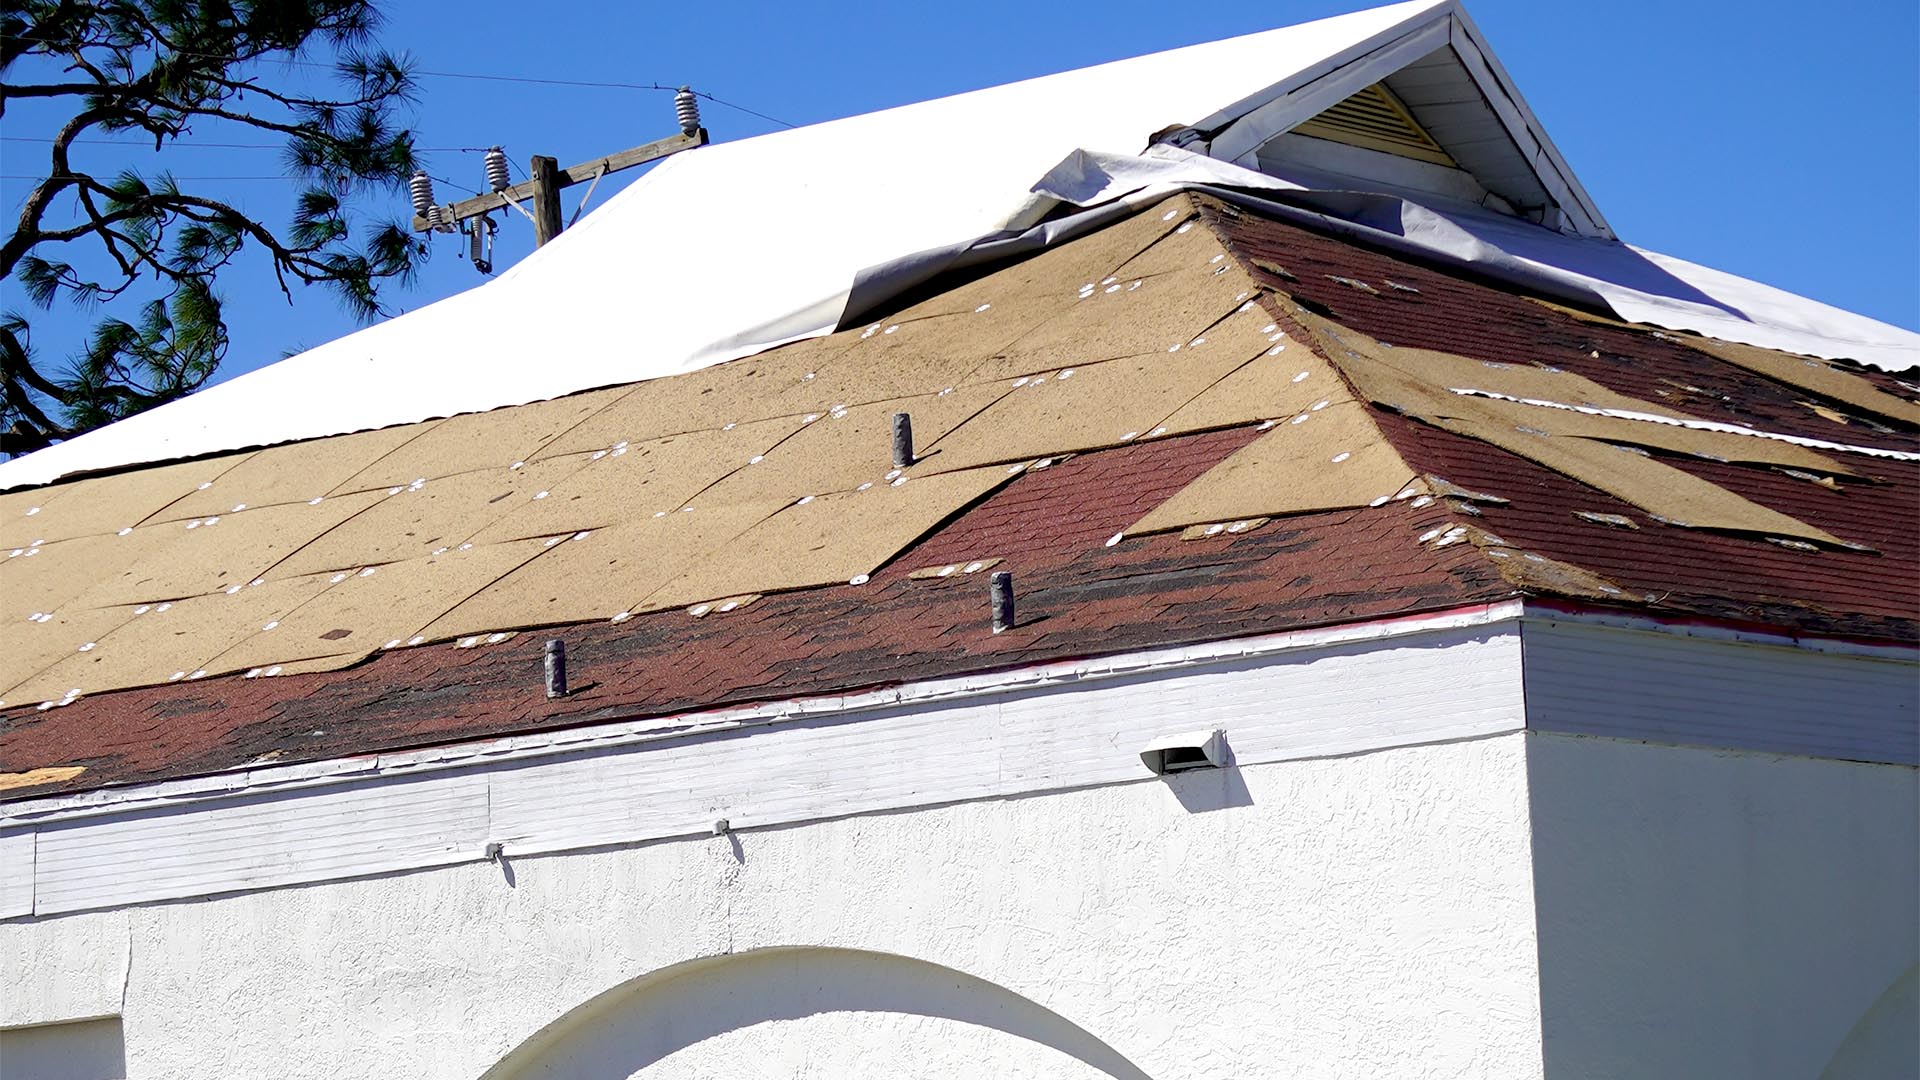 Hurricane Ian damages roof and commercial property